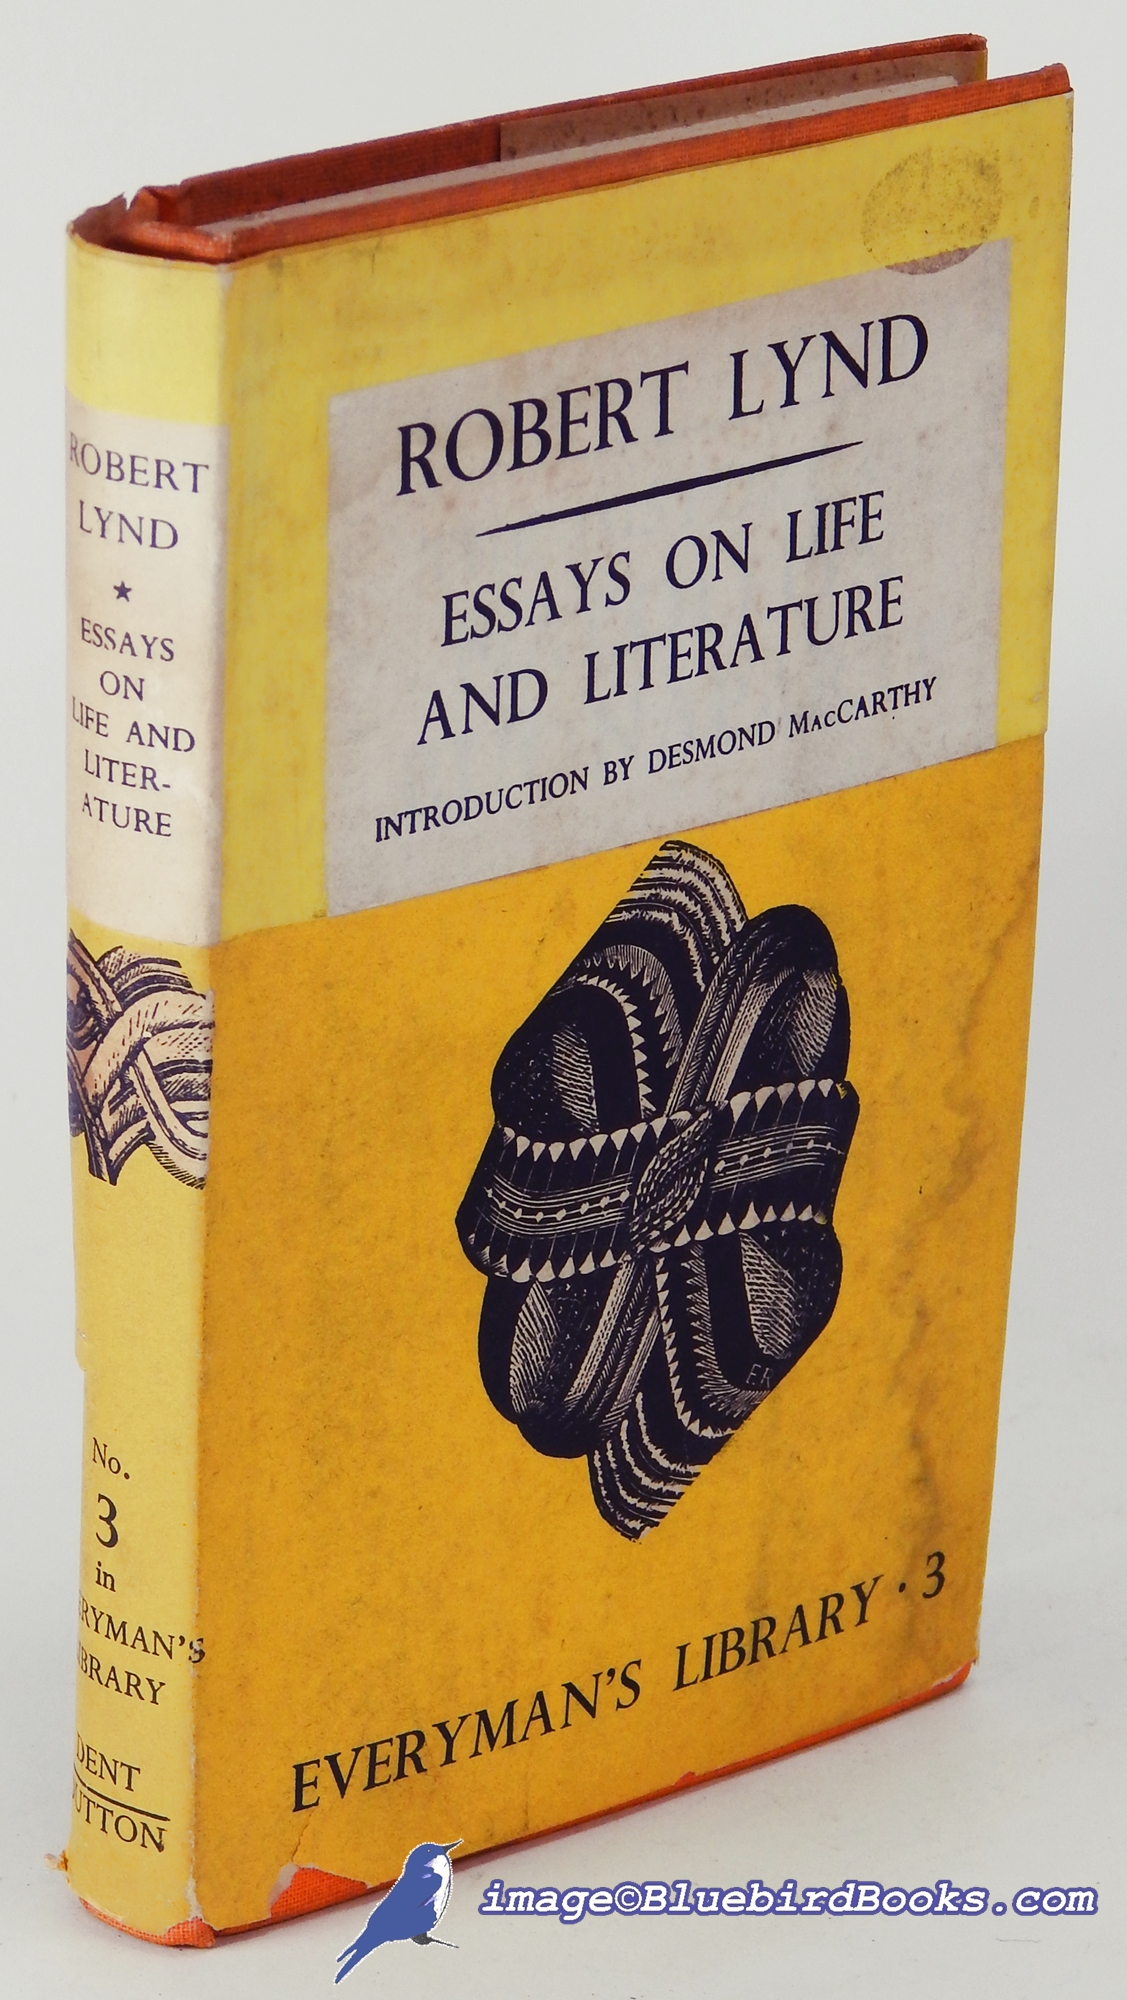 LYND, ROBERT - Essays on Life and Literature (Everyman's Library #990)